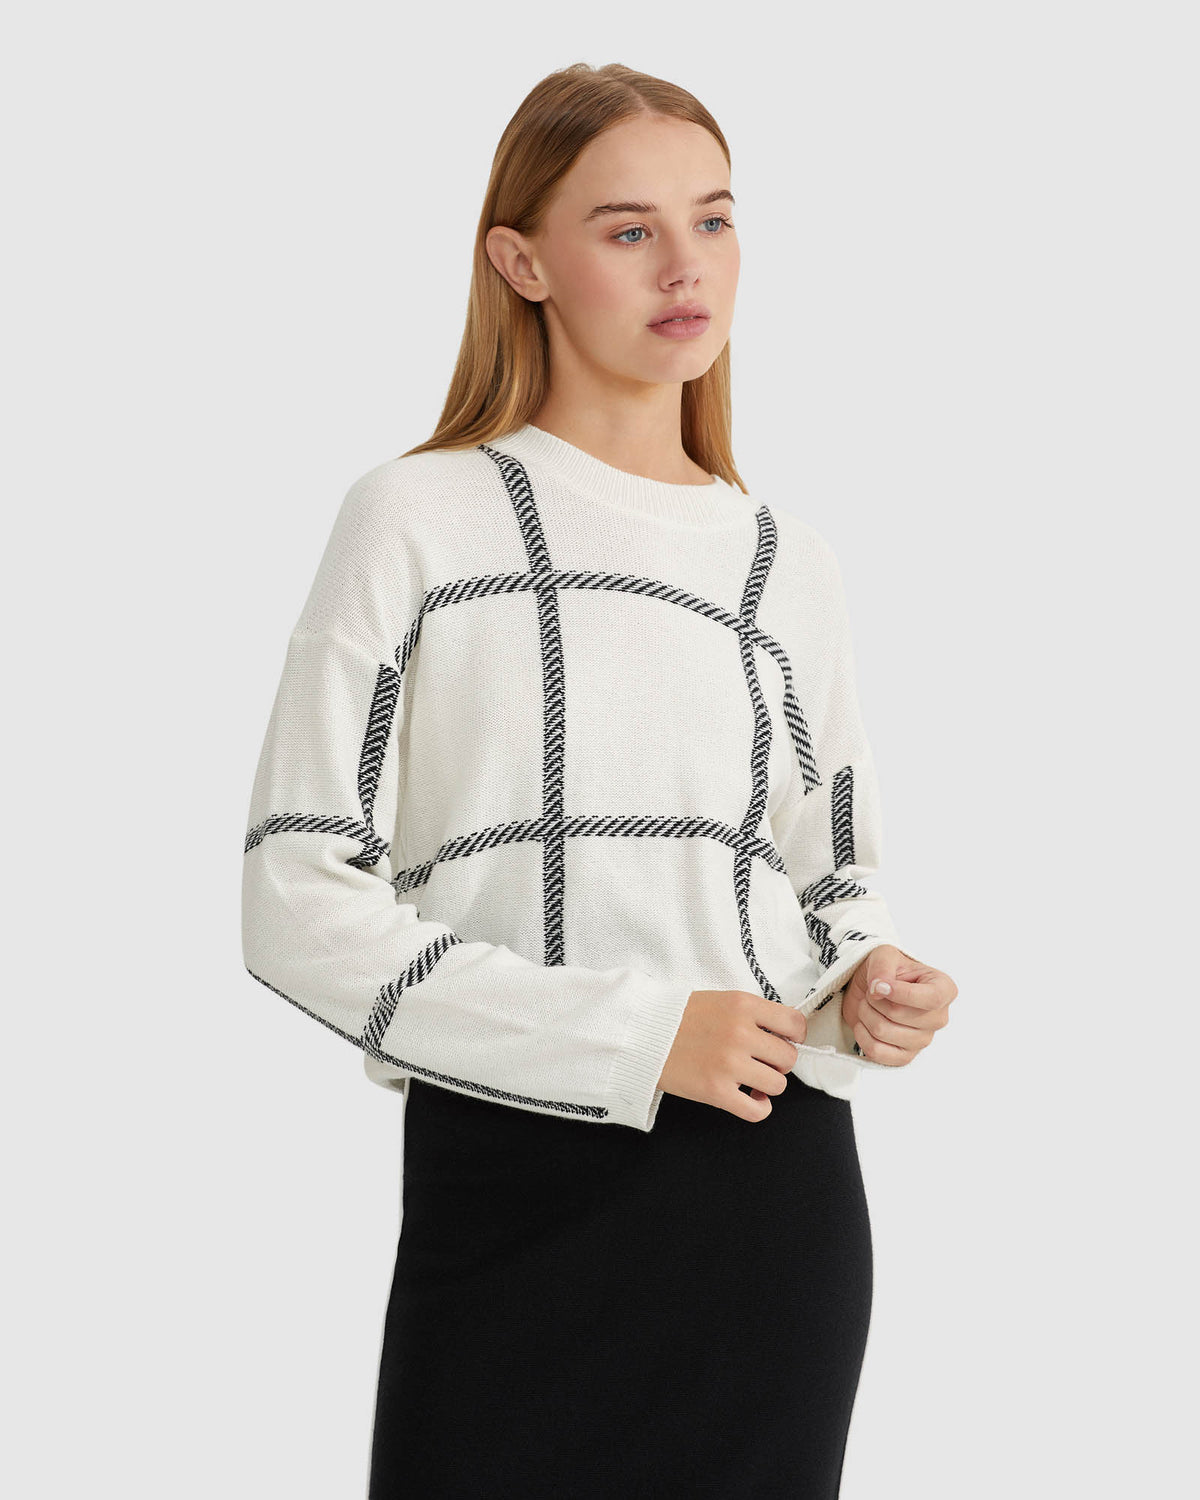 PEGGY GRAPHIC CREW NECK KNIT TOP WOMENS KNITWEAR